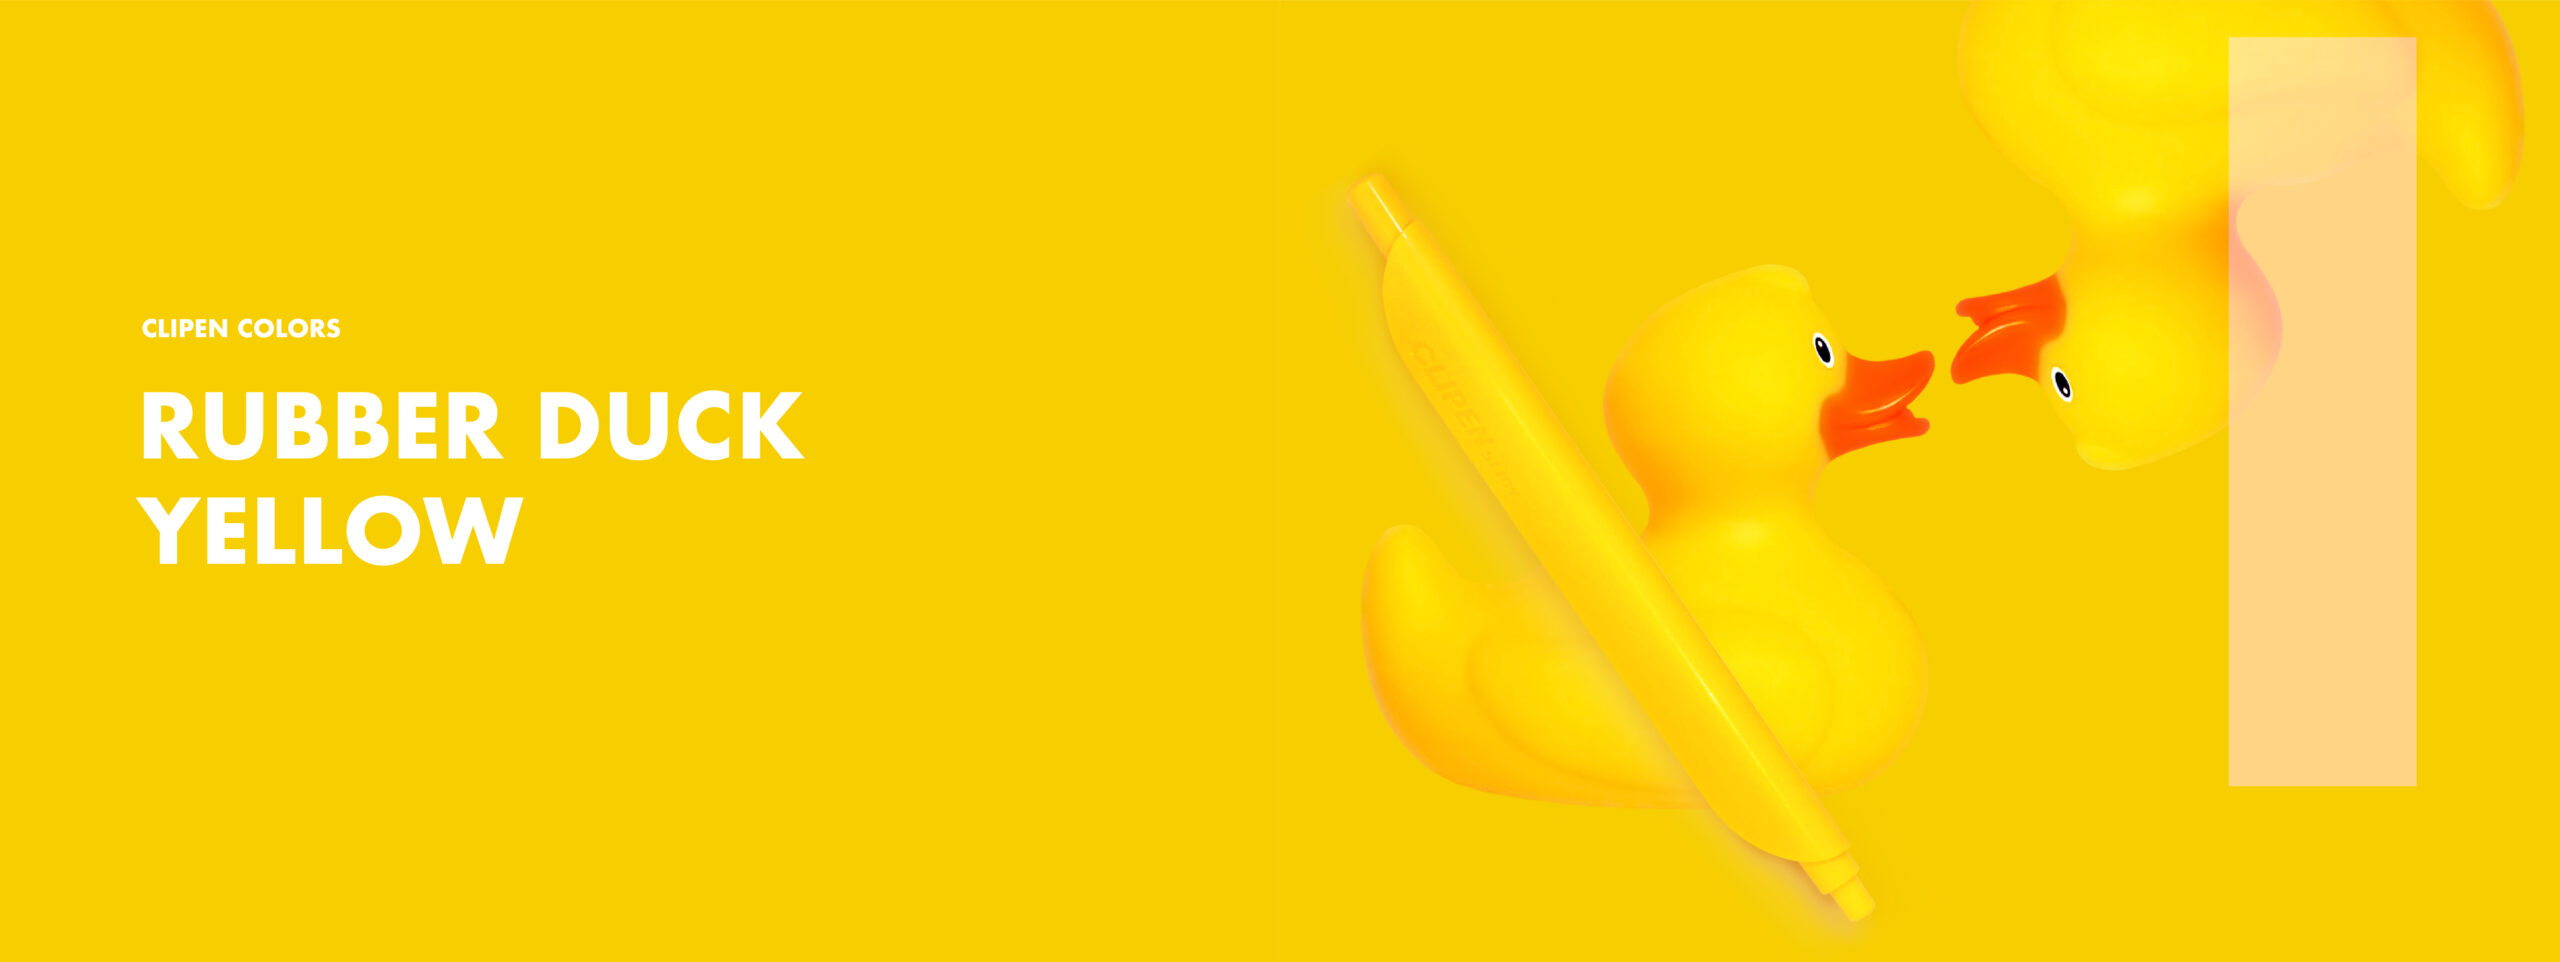 11 Rubber duck yellow